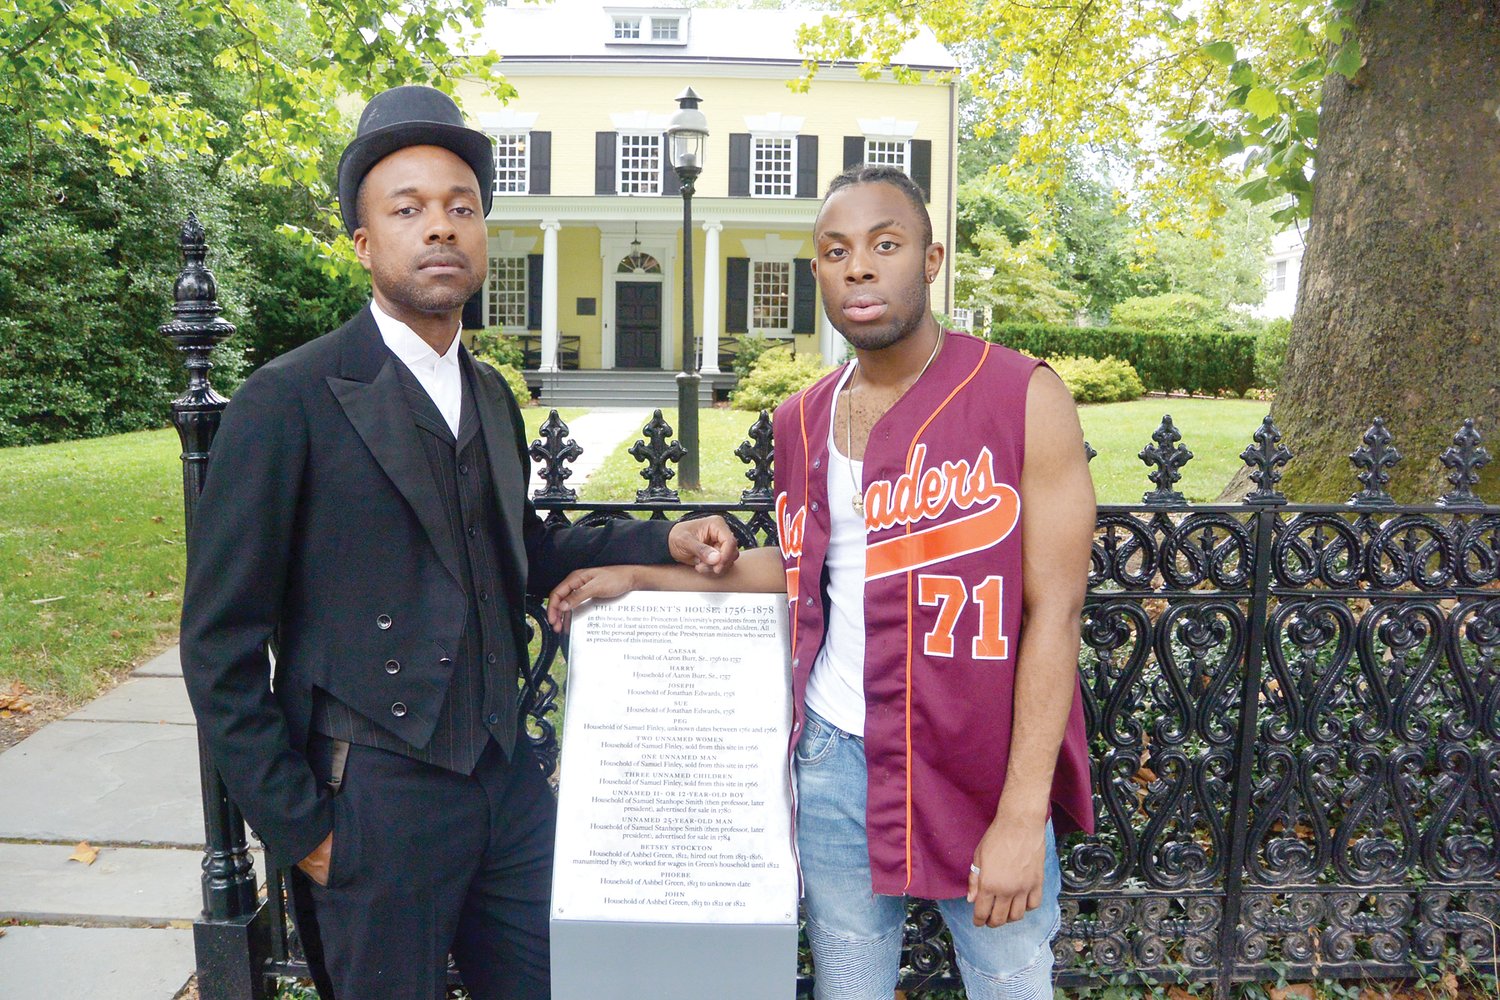 Topdog/Underdog cast members Travis Raeburn and Nathaniel Ryan stand in front of Maclean House at Princeton University, with a memorial to the 16 enslaved individuals who occupied the building when it served as the official residence of the university president.